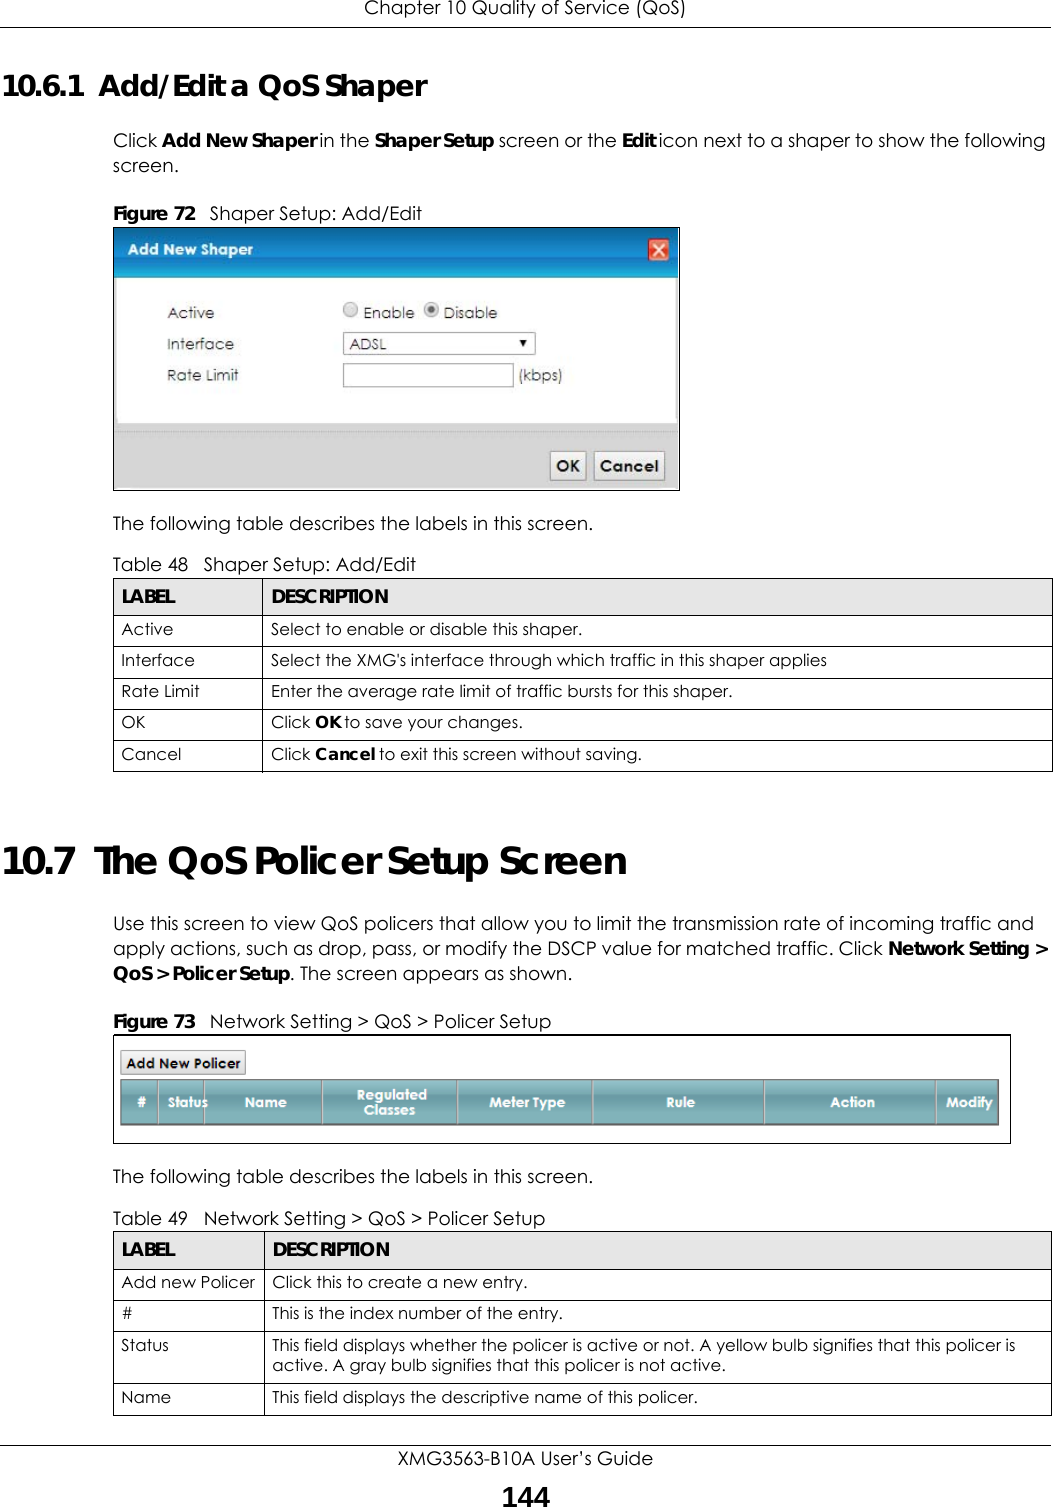 Chapter 10 Quality of Service (QoS)XMG3563-B10A User’s Guide14410.6.1  Add/Edit a QoS Shaper Click Add New Shaper in the Shaper Setup screen or the Edit icon next to a shaper to show the following screen. Figure 72   Shaper Setup: Add/Edit The following table describes the labels in this screen. 10.7  The QoS Policer Setup ScreenUse this screen to view QoS policers that allow you to limit the transmission rate of incoming traffic and apply actions, such as drop, pass, or modify the DSCP value for matched traffic. Click Network Setting &gt; QoS &gt; Policer Setup. The screen appears as shown. Figure 73   Network Setting &gt; QoS &gt; Policer Setup The following table describes the labels in this screen.  Table 48   Shaper Setup: Add/EditLABEL DESCRIPTIONActive Select to enable or disable this shaper.Interface Select the XMG&apos;s interface through which traffic in this shaper appliesRate Limit Enter the average rate limit of traffic bursts for this shaper.OK Click OK to save your changes.Cancel Click Cancel to exit this screen without saving.Table 49   Network Setting &gt; QoS &gt; Policer SetupLABEL DESCRIPTIONAdd new Policer Click this to create a new entry.#This is the index number of the entry.Status This field displays whether the policer is active or not. A yellow bulb signifies that this policer is active. A gray bulb signifies that this policer is not active.Name This field displays the descriptive name of this policer.